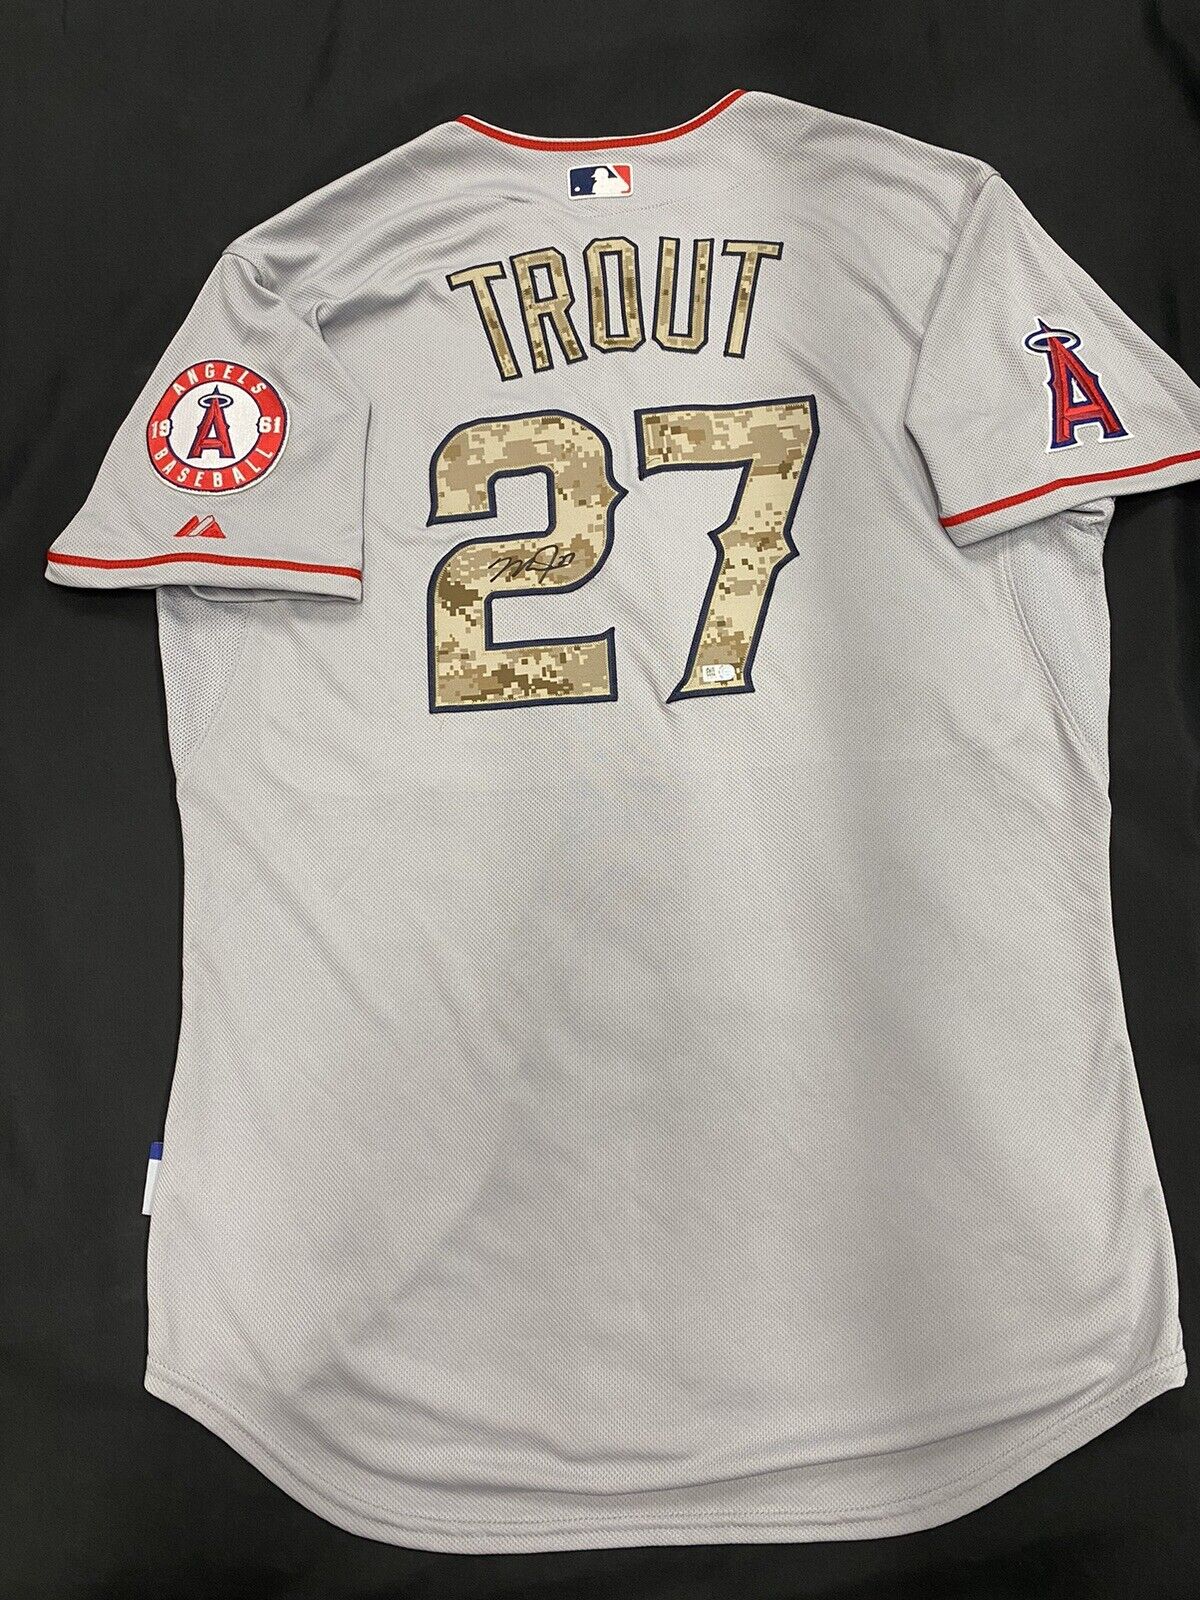 Mike Trout Signed Authentic 2014 Memorial Day Angels Jersey MLB Holo